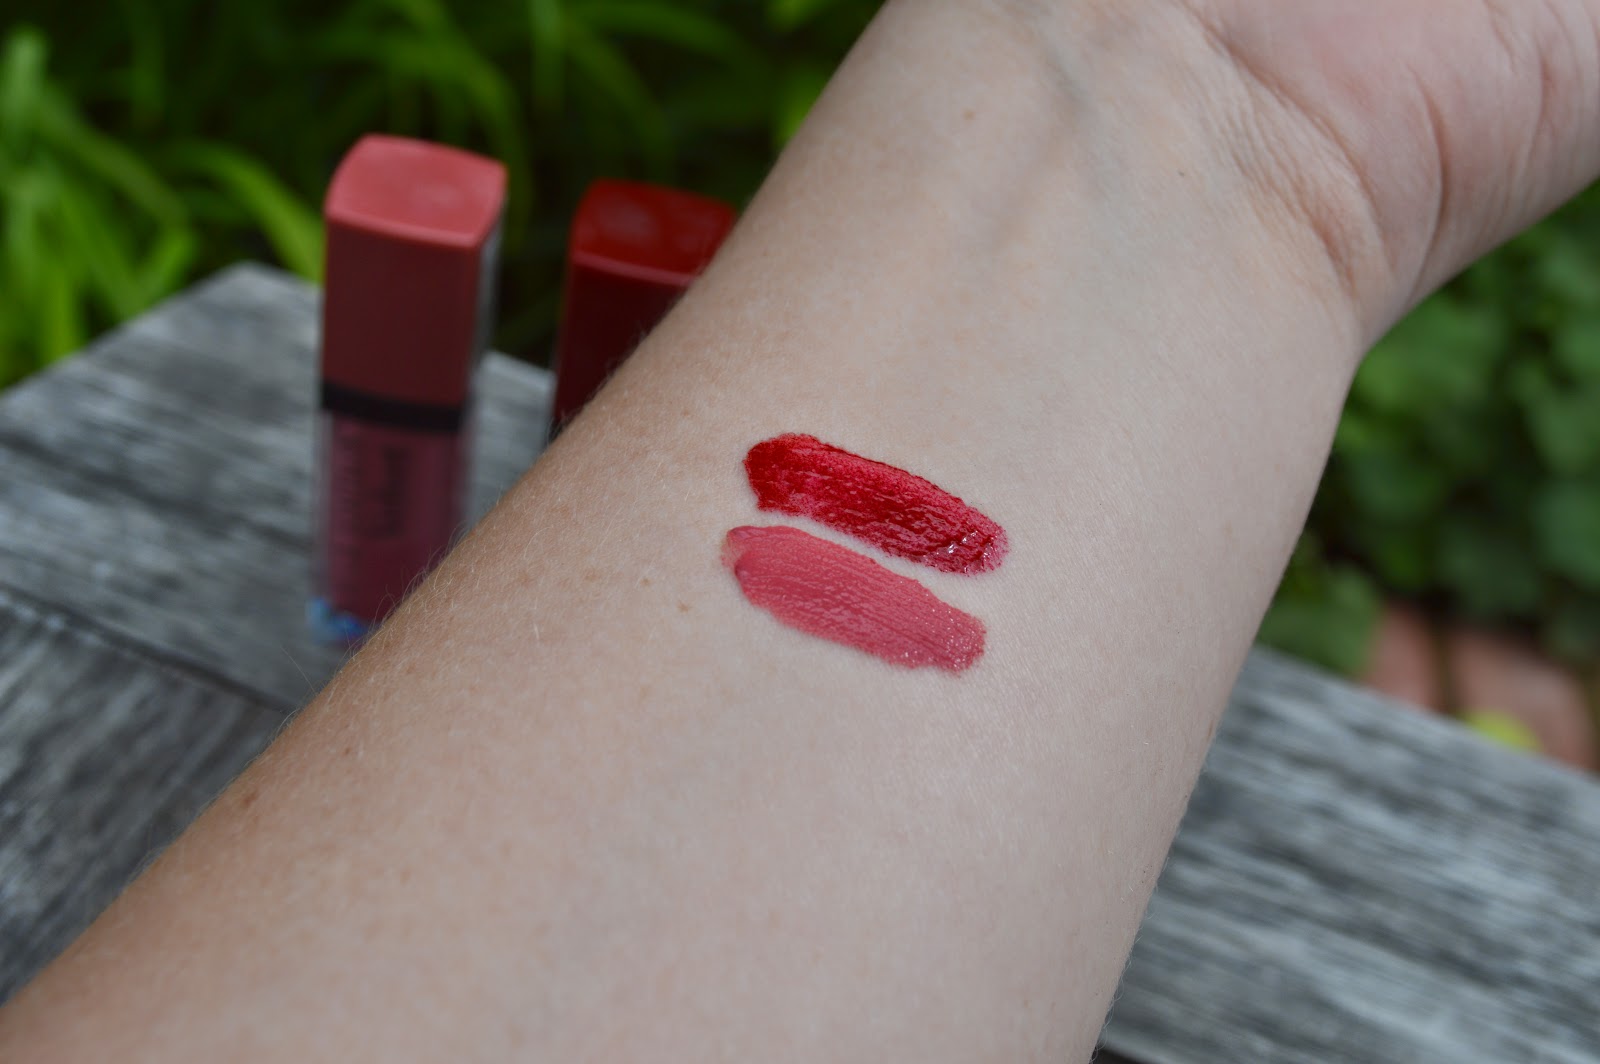 Bourjois Rouge Edition Velvet in 07 Nude-ist and 08 Grand Cru Review